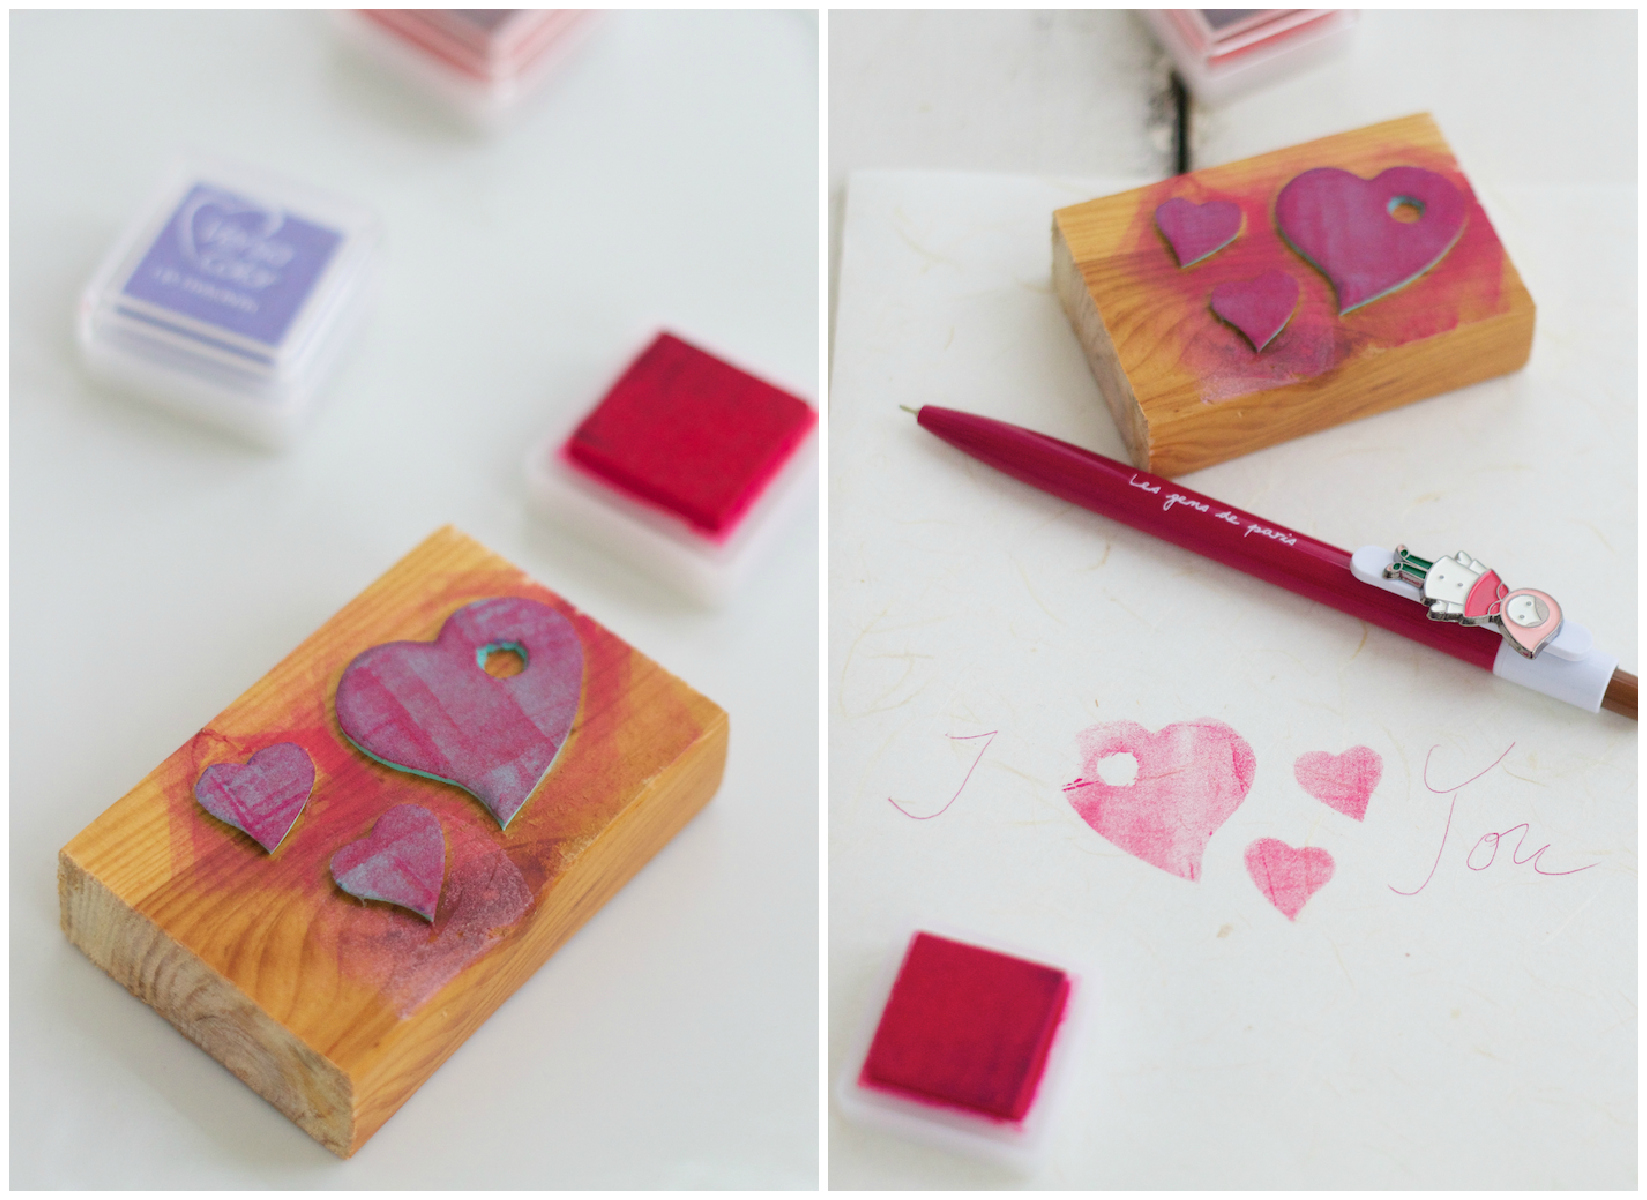 my first handcrafted stamp - a heart